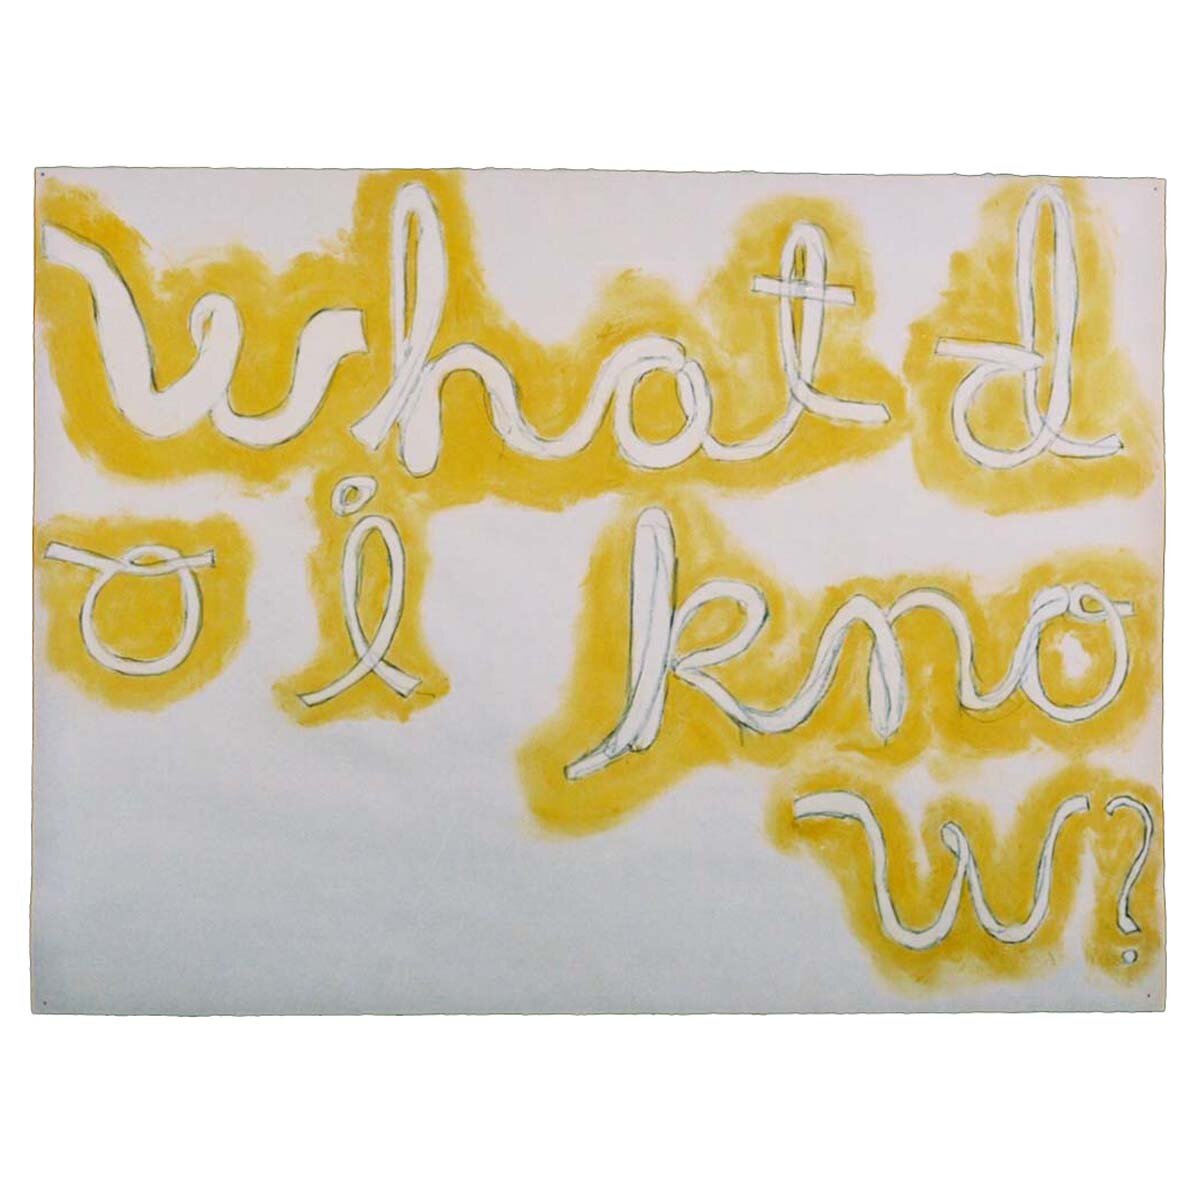 what do i know, 2005